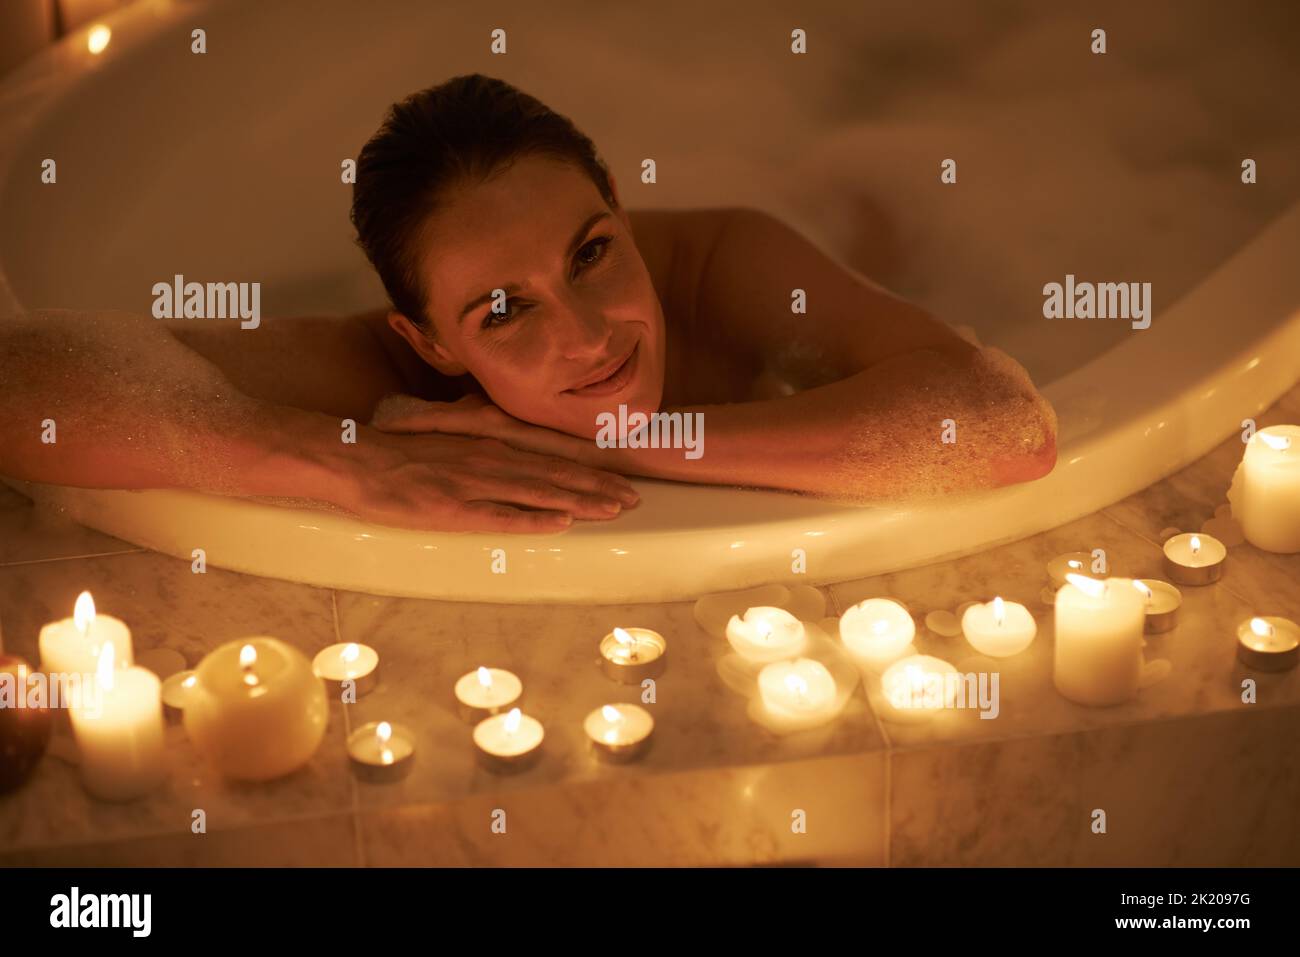 https://c8.alamy.com/comp/2K2097G/nothing-relaxes-one-better-than-a-bubble-bath-a-gorgeous-woman-relaxing-in-a-candle-lit-bath-2K2097G.jpg